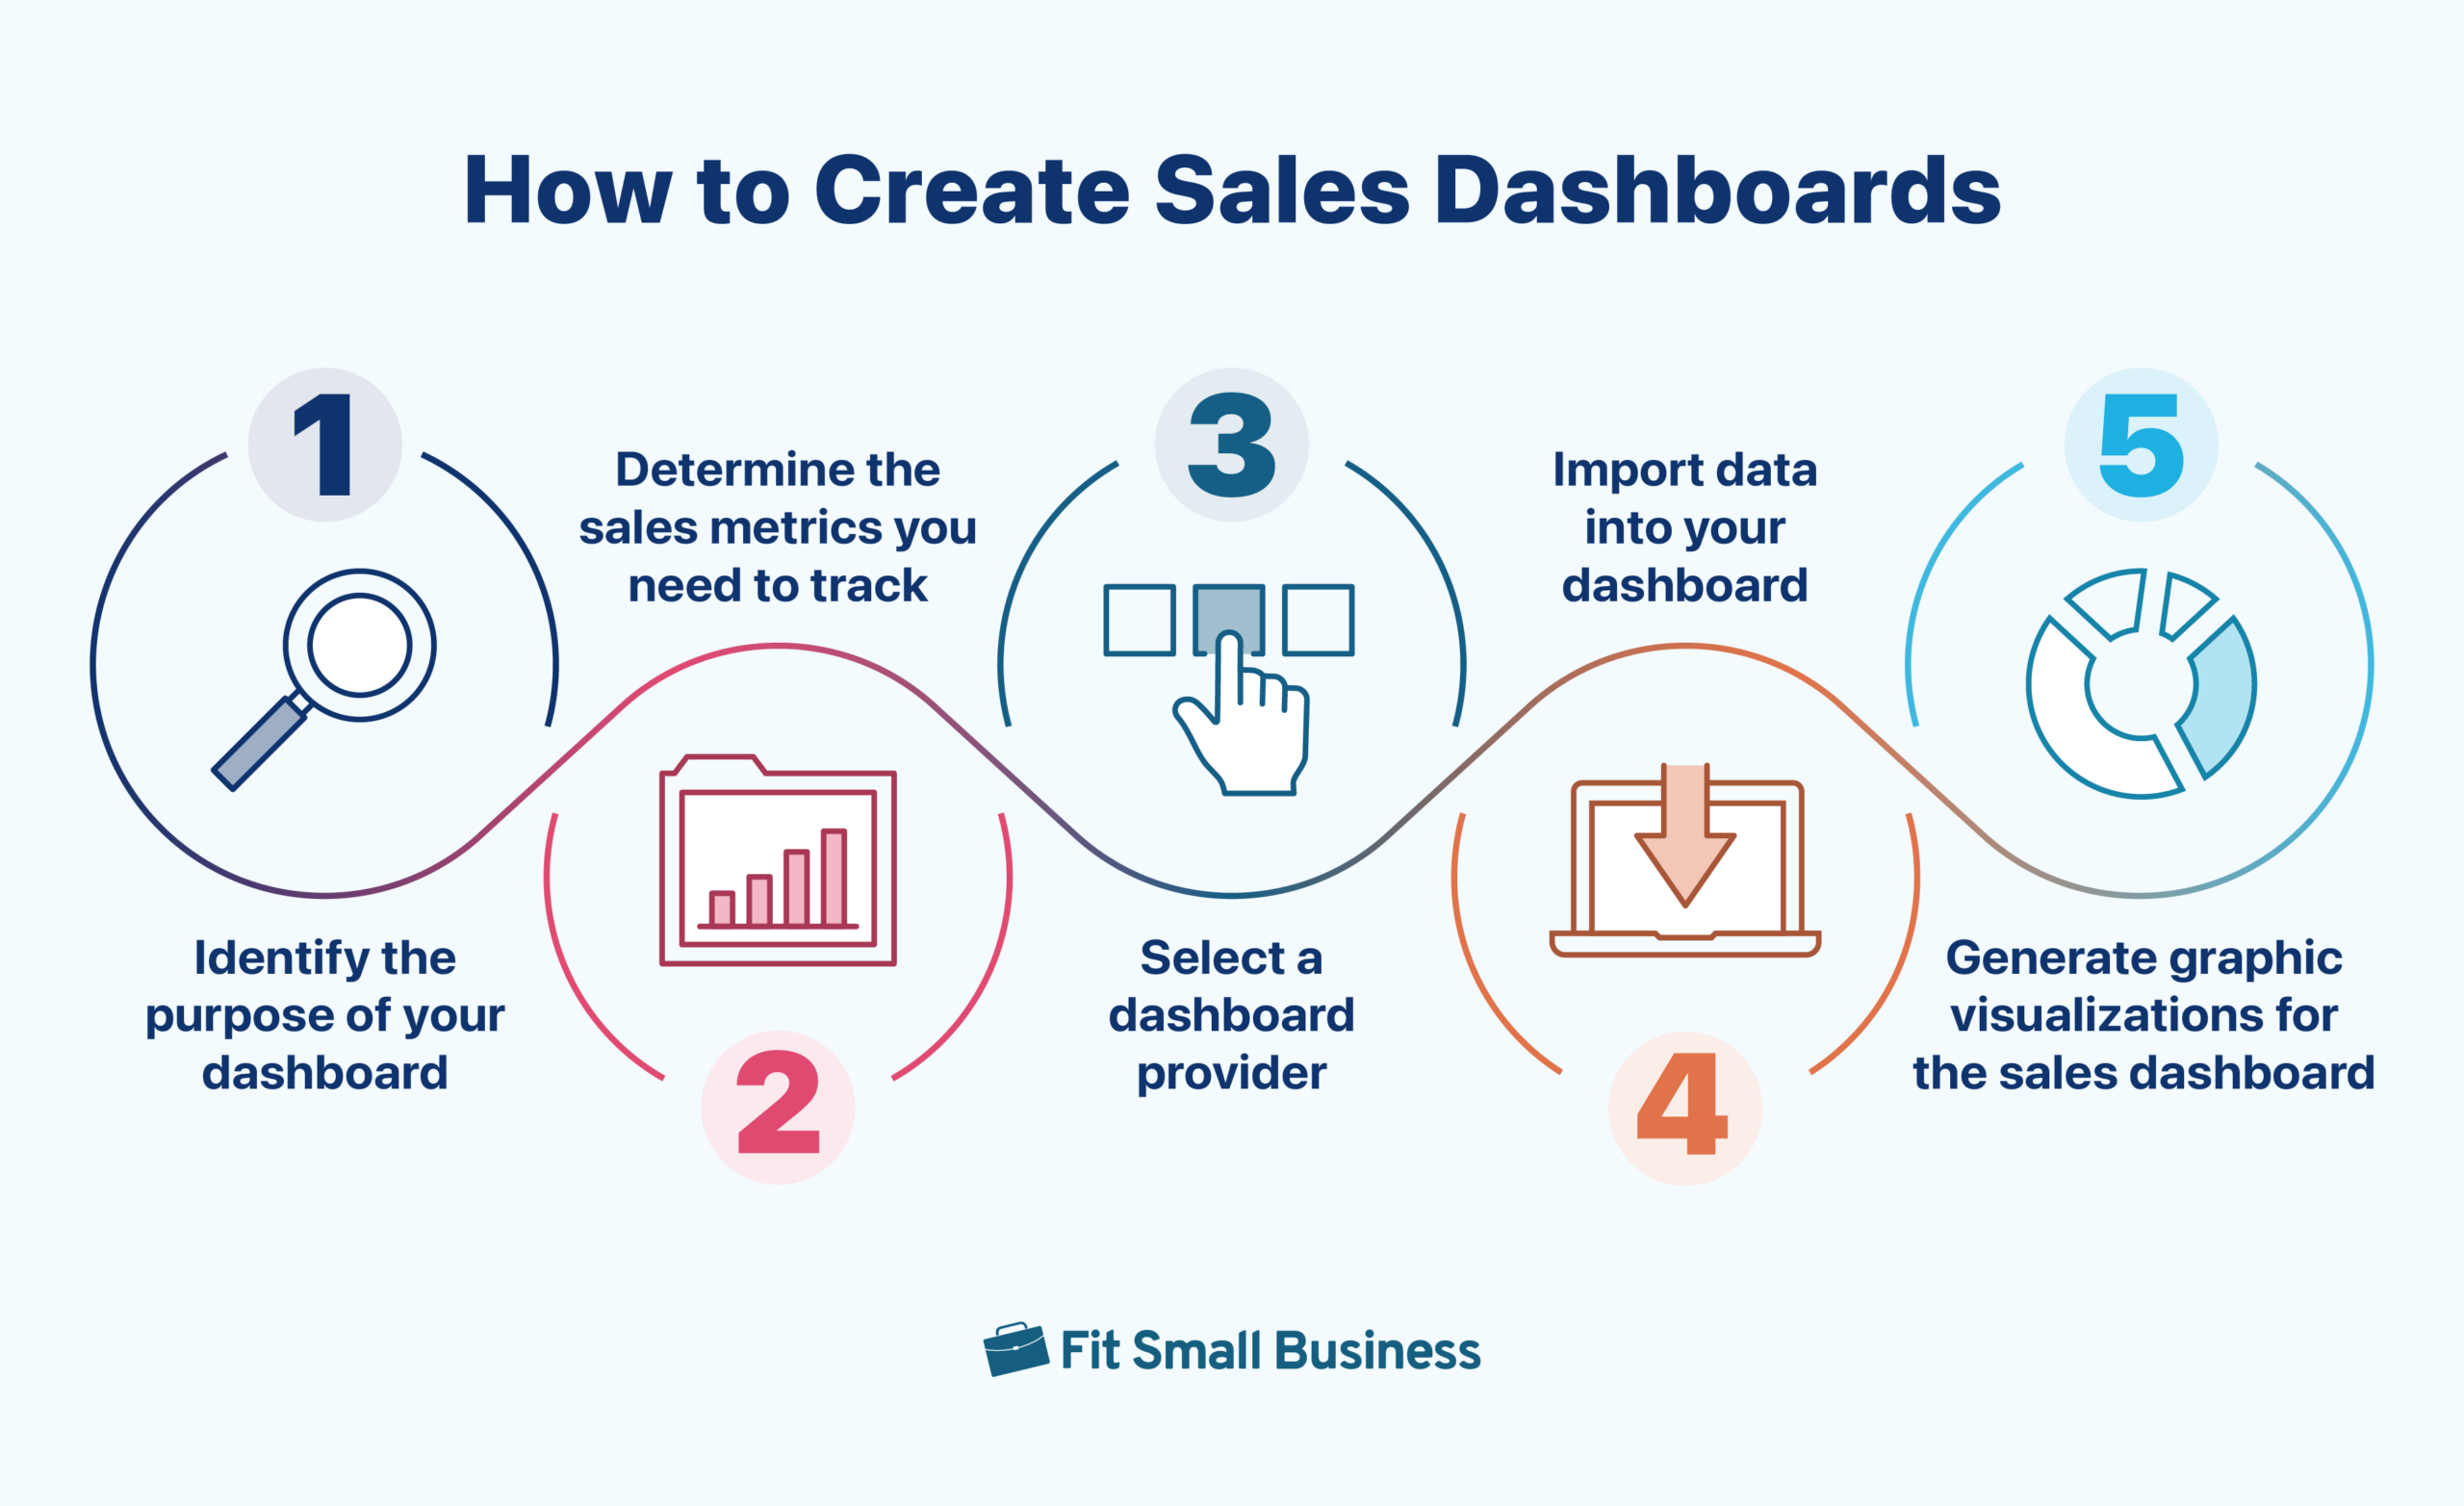 A diagram showing the five steps in creating sales dashboards.